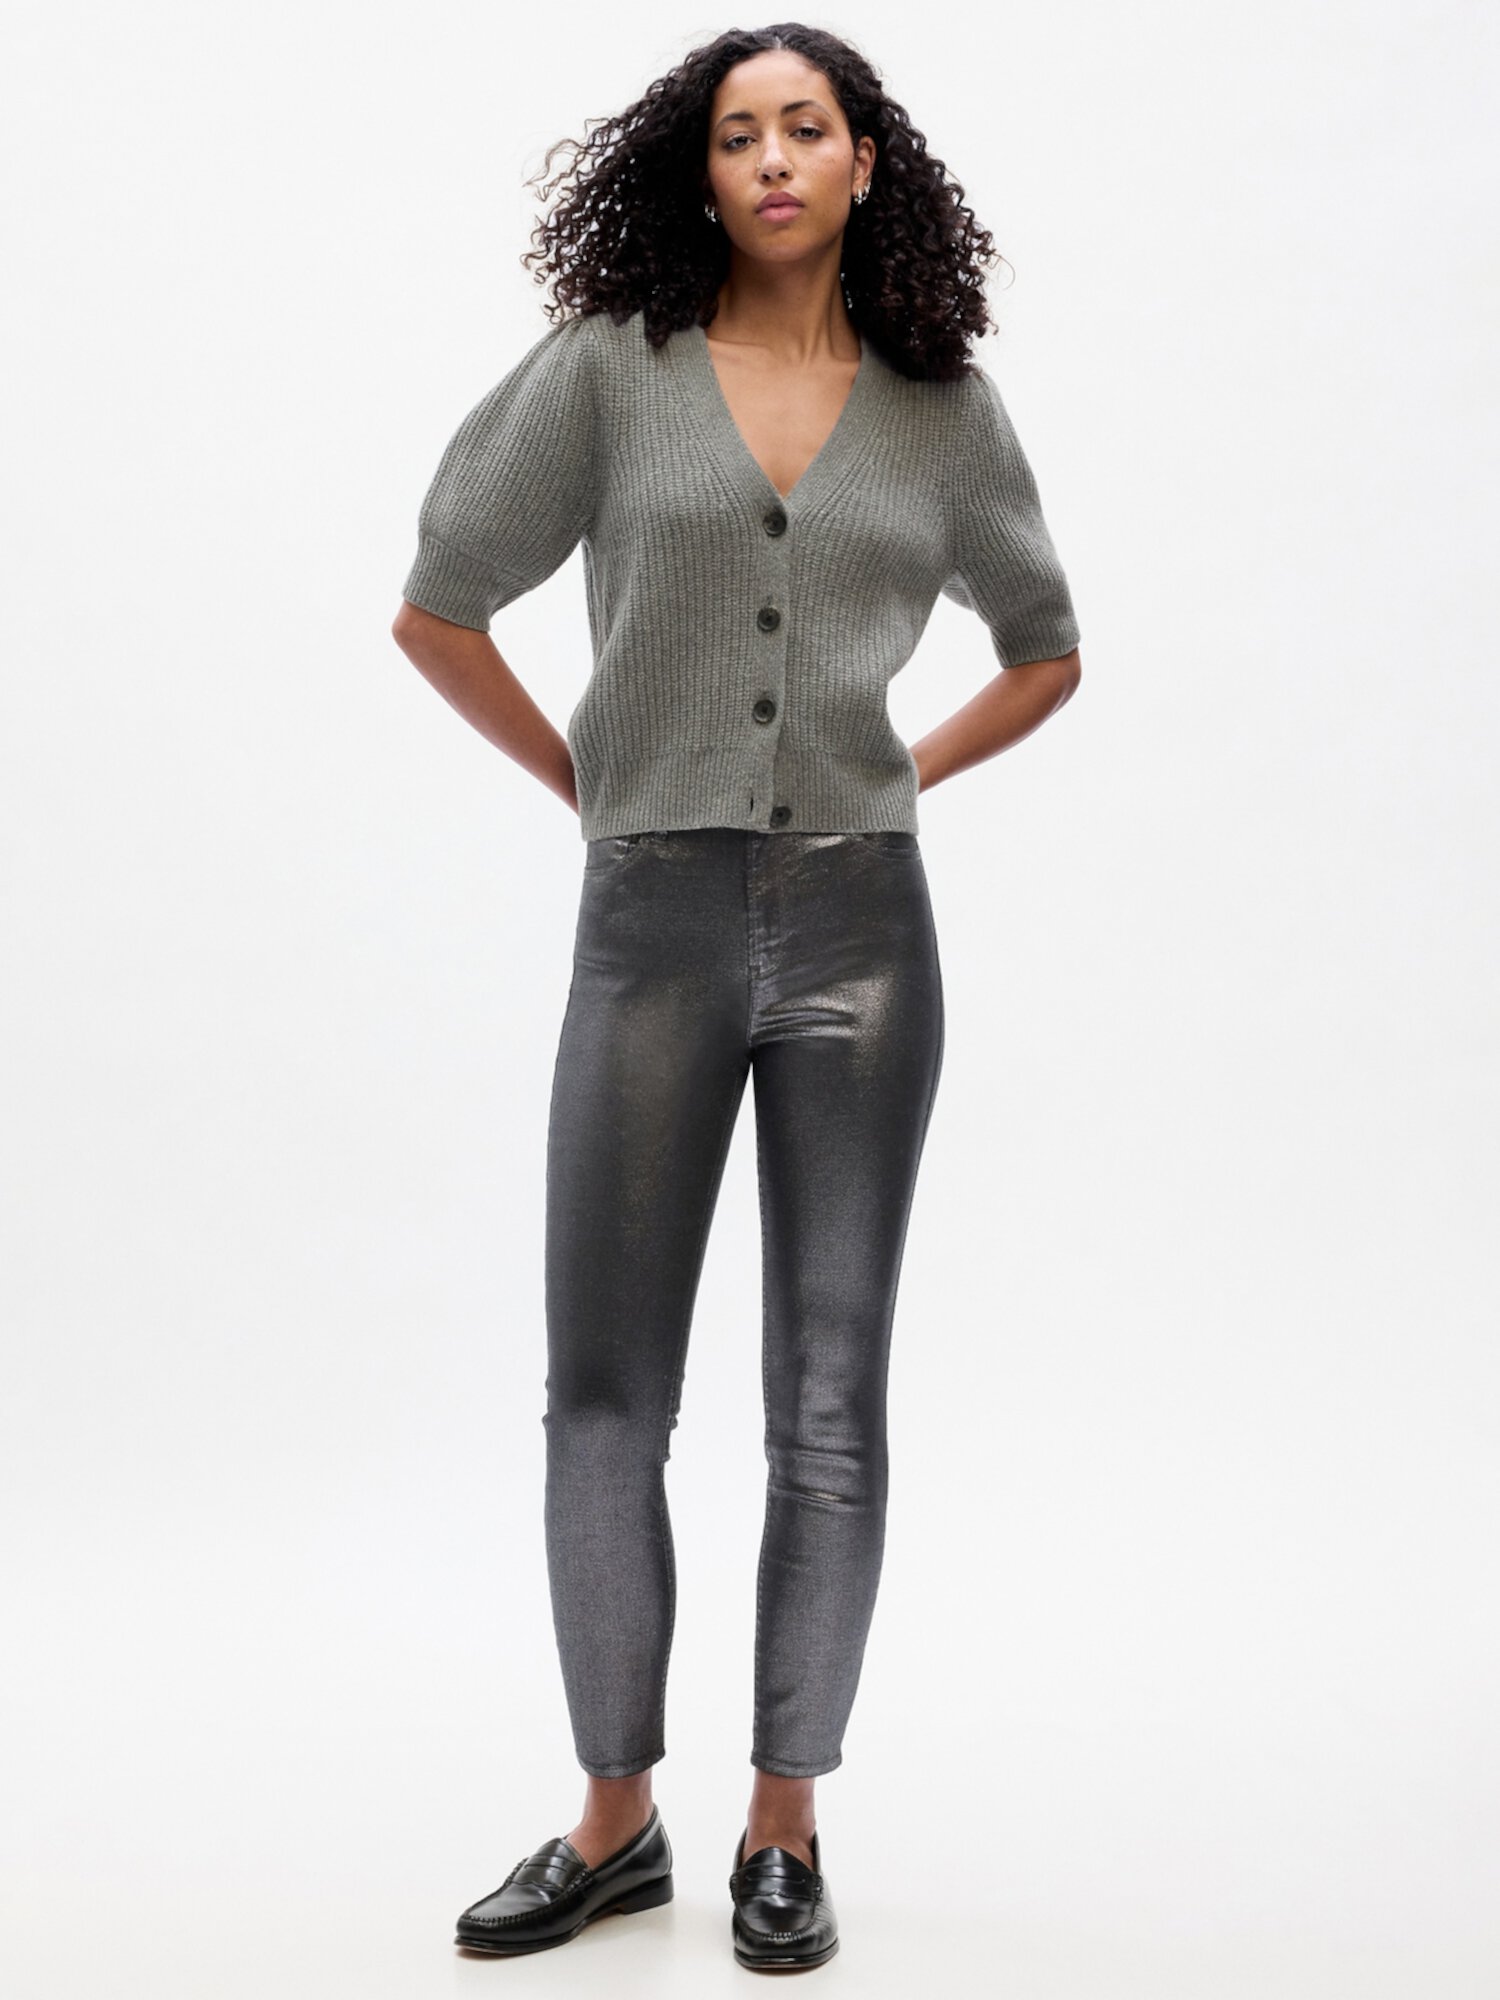 High Rise Universal Legging Jeans with Washwell Gap Factory